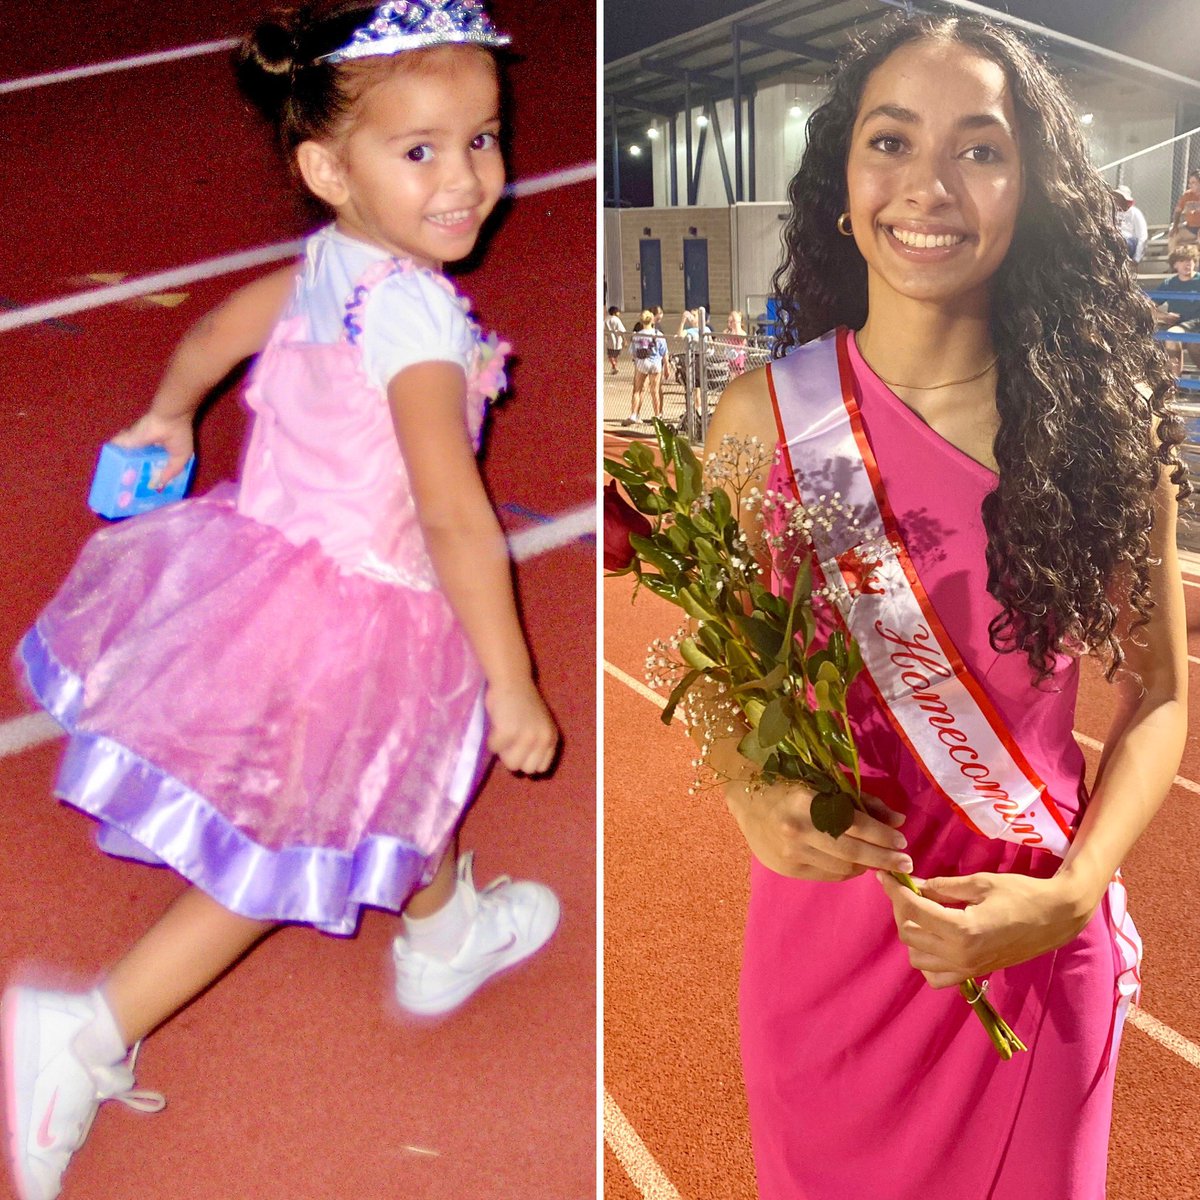 2-year old @LusiaLangi visiting me at work, running around Bobcat Stadium, rockin’ a princess dress, Nikes, with a camera in hand. Now she’s 18, a HS All-American who will play D1 volleyball, major in Sports Management & Media Studies, & is kinda TikTok famous. Life’s a trip…